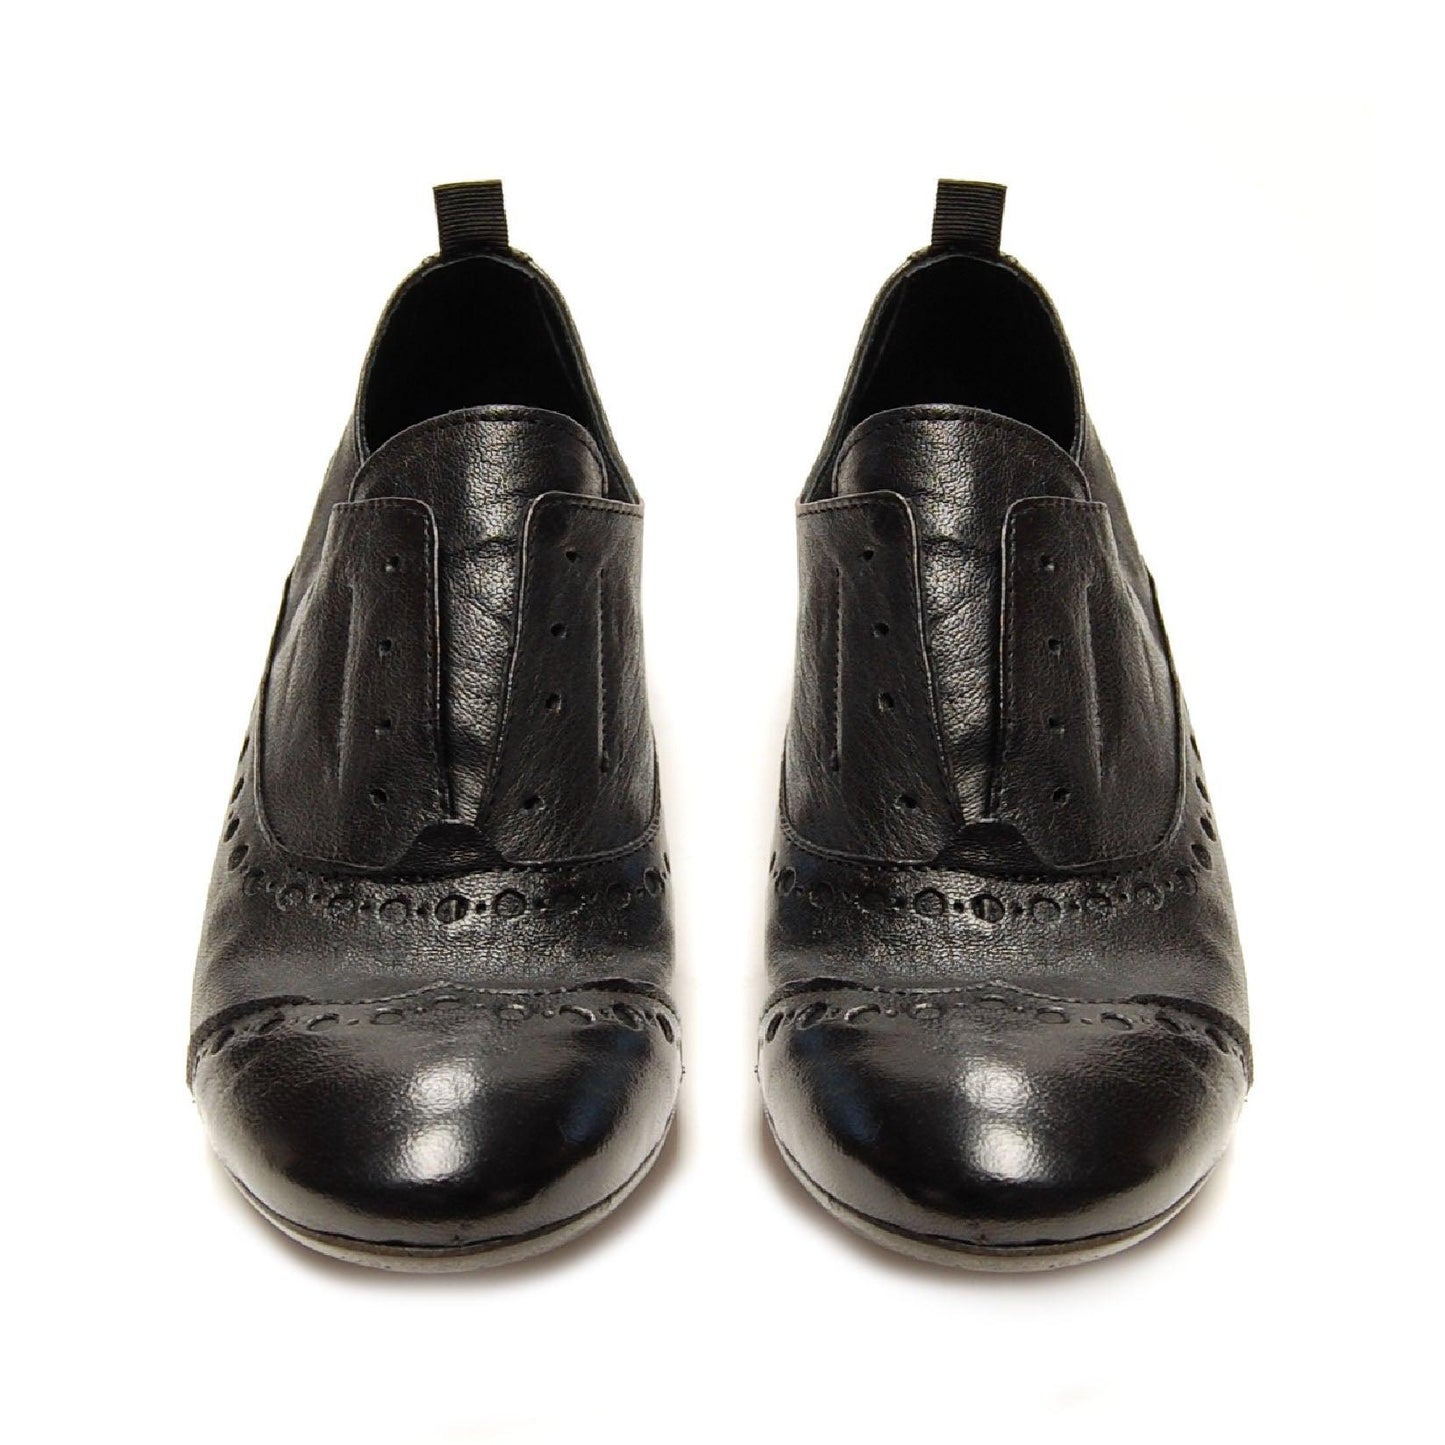 GIUSY 070 - Texas Leather SHOES BLACK - History541